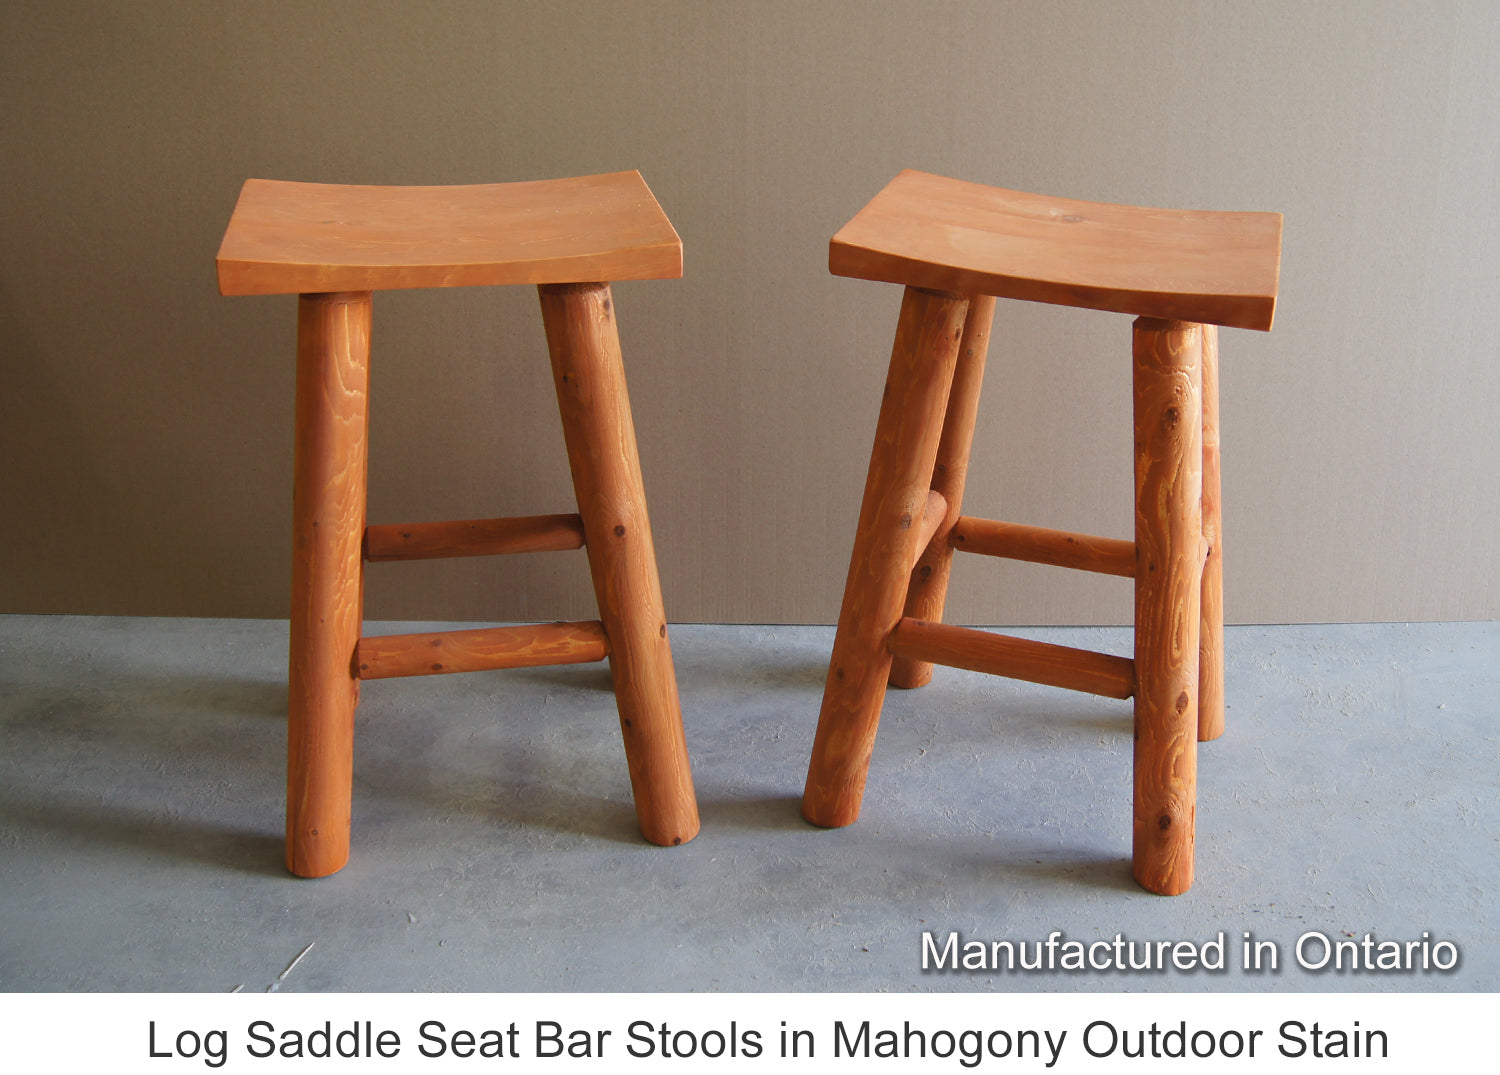 Log Saddle Seat Bar Stools in Mahogony Outdoor Stain